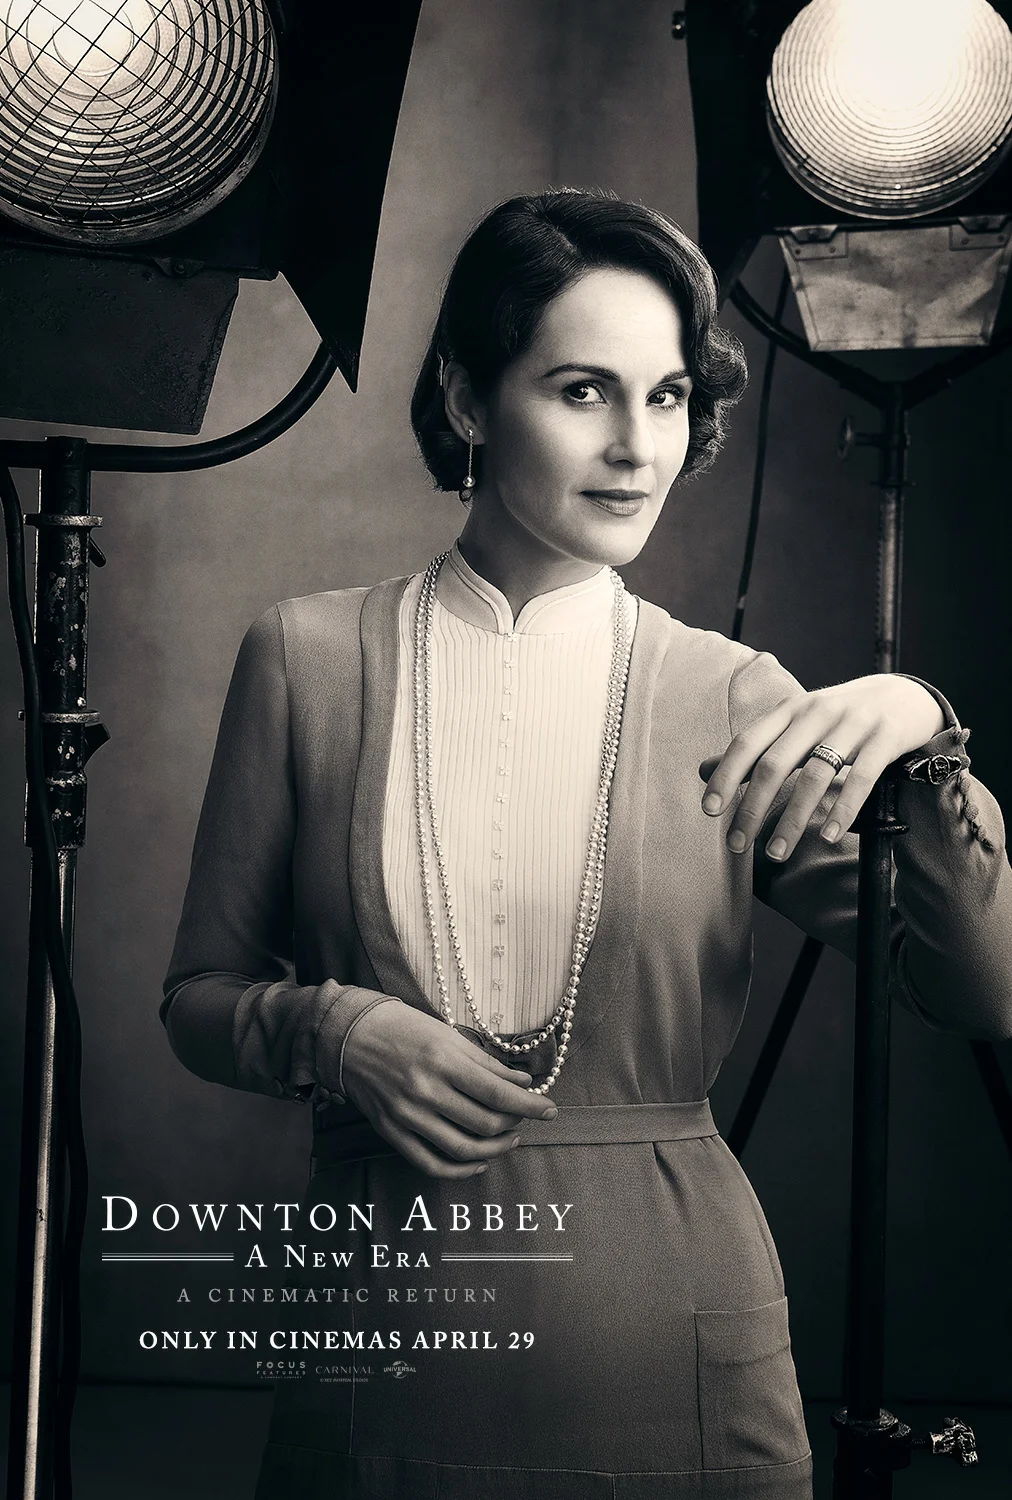 downton-abbey-a-new-era-released-character-posters-multiple-main-actors-appear-1